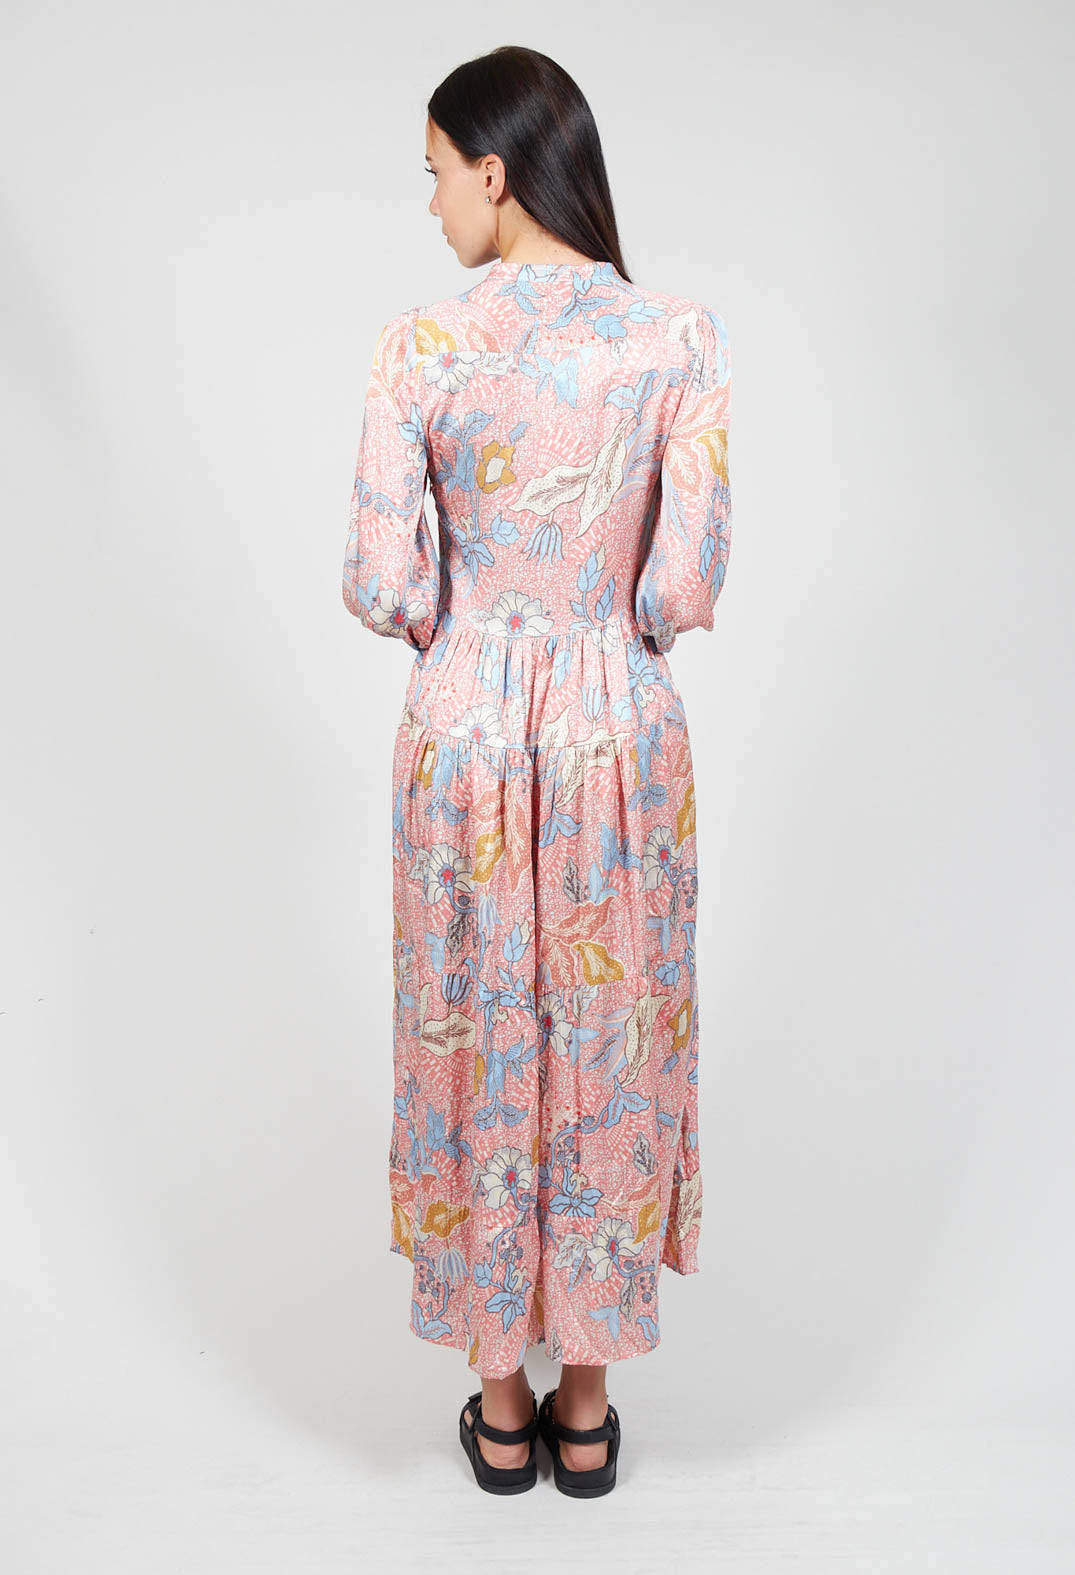 Long Dress with Puffed Sleeves in Native Taffy